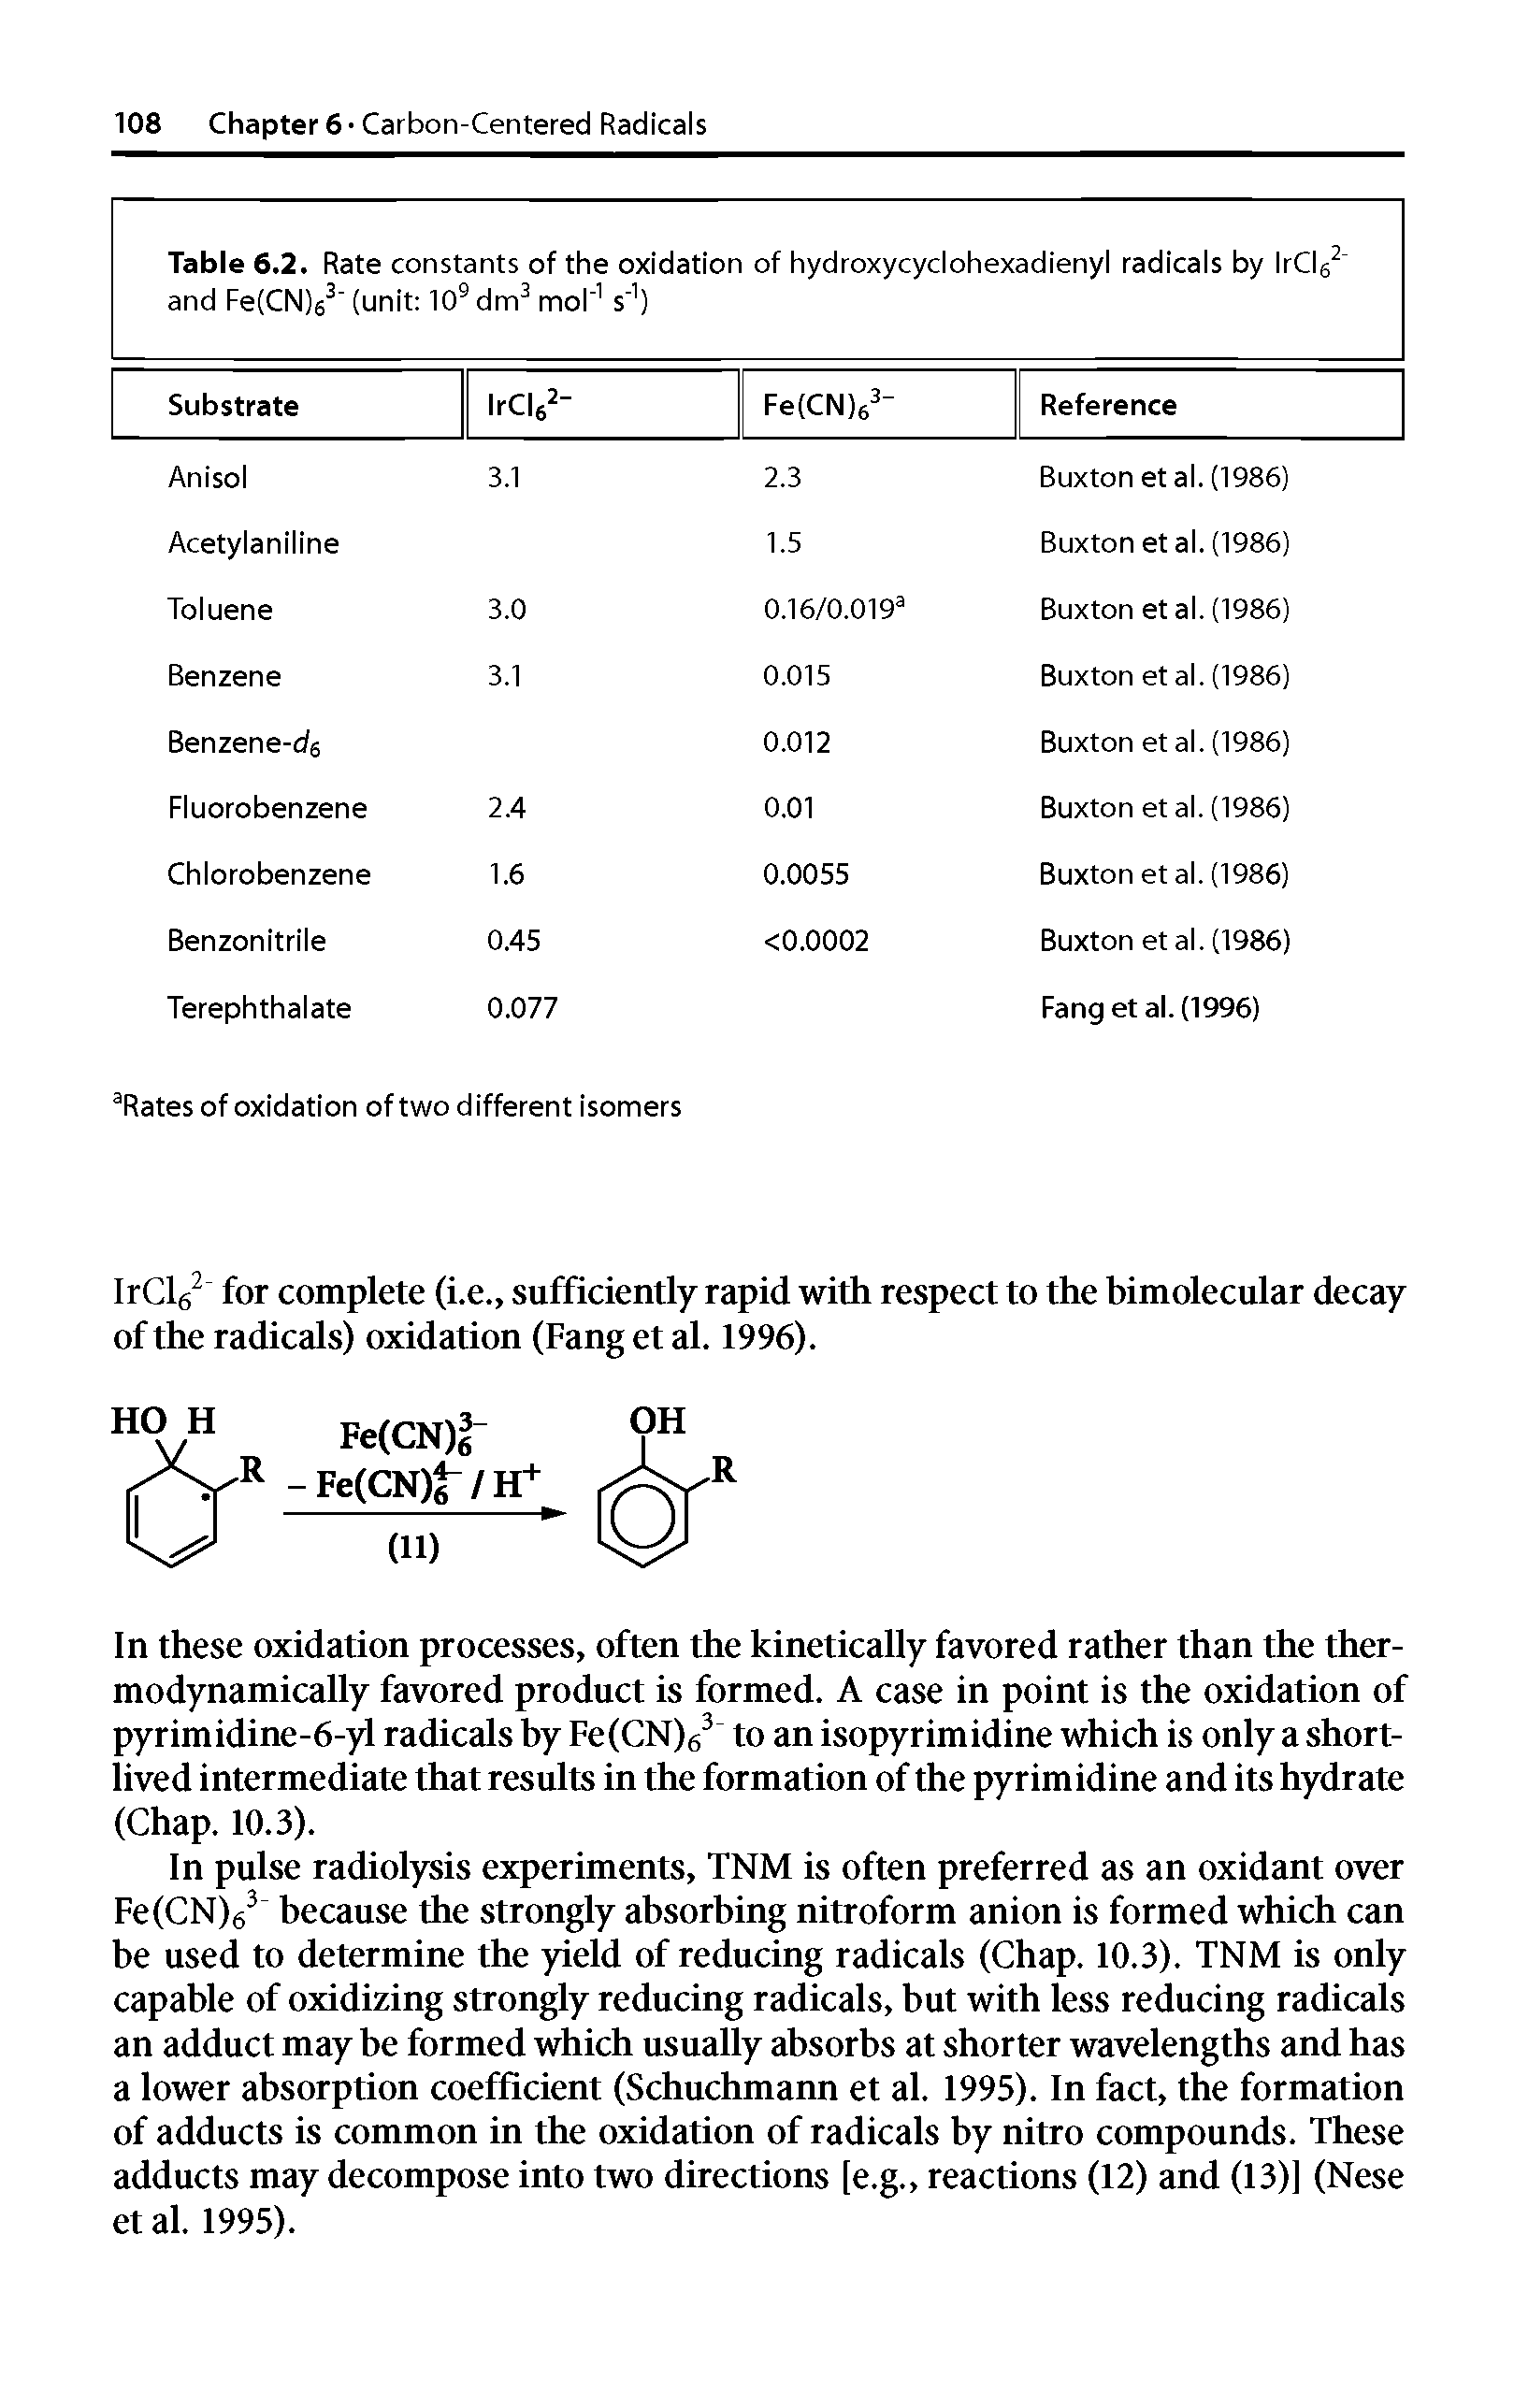 Table 6.2. Rate constants of the oxidation of hydroxycyclohexadienyl radicals by IrClg2 and Fe(CN)63- (unit 109 dm3 mol 1 s 1) ...